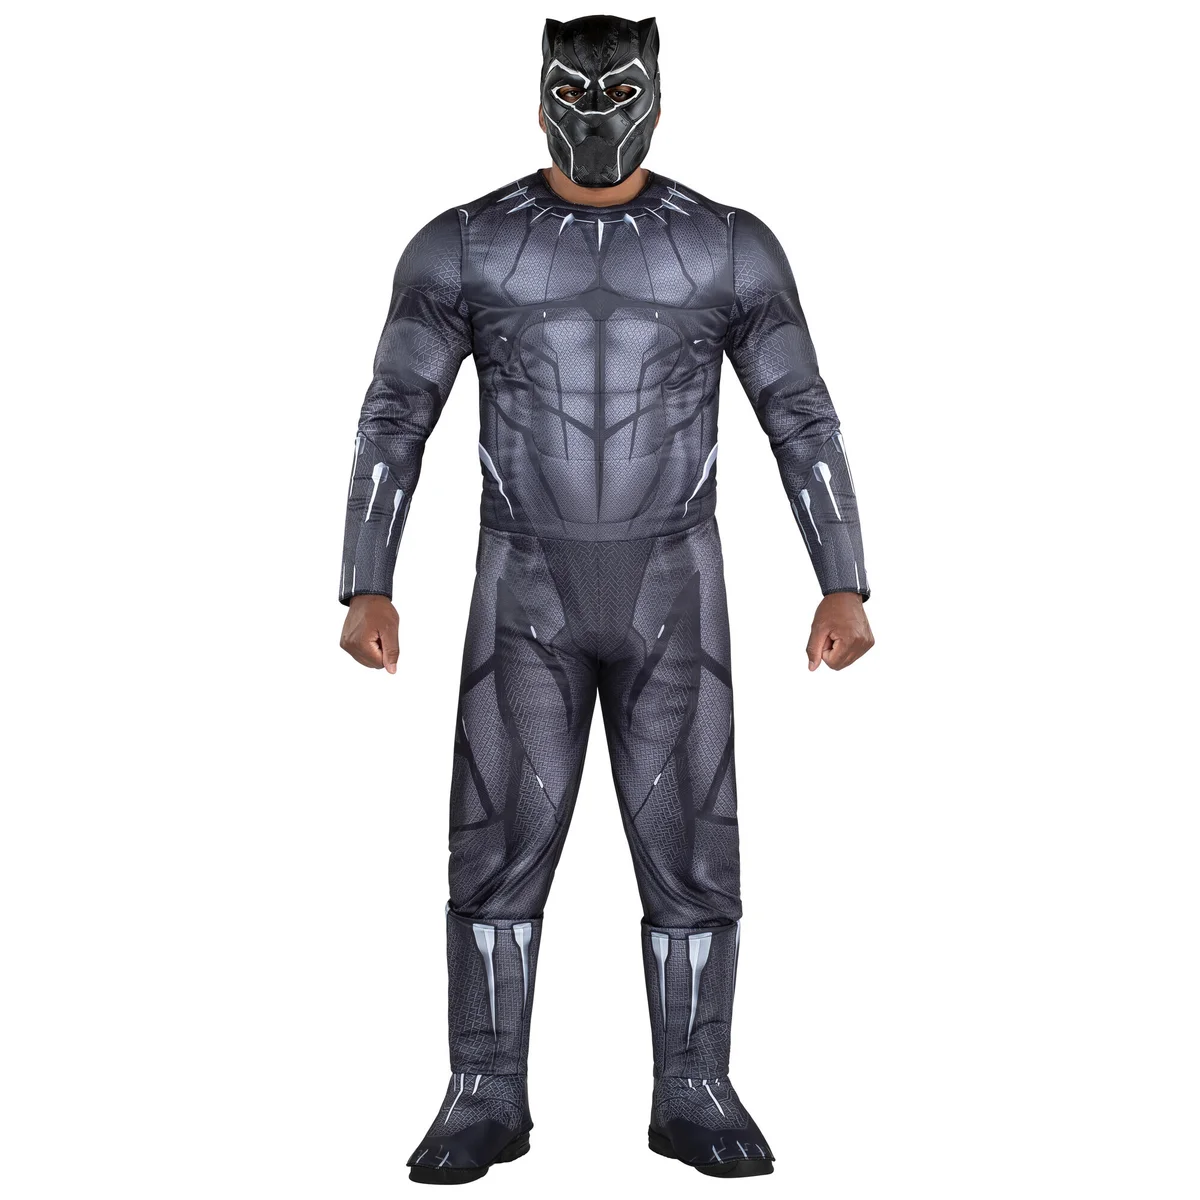 AVENGERS DELUXE BLACK PANTHER COSTUME FOR MEN